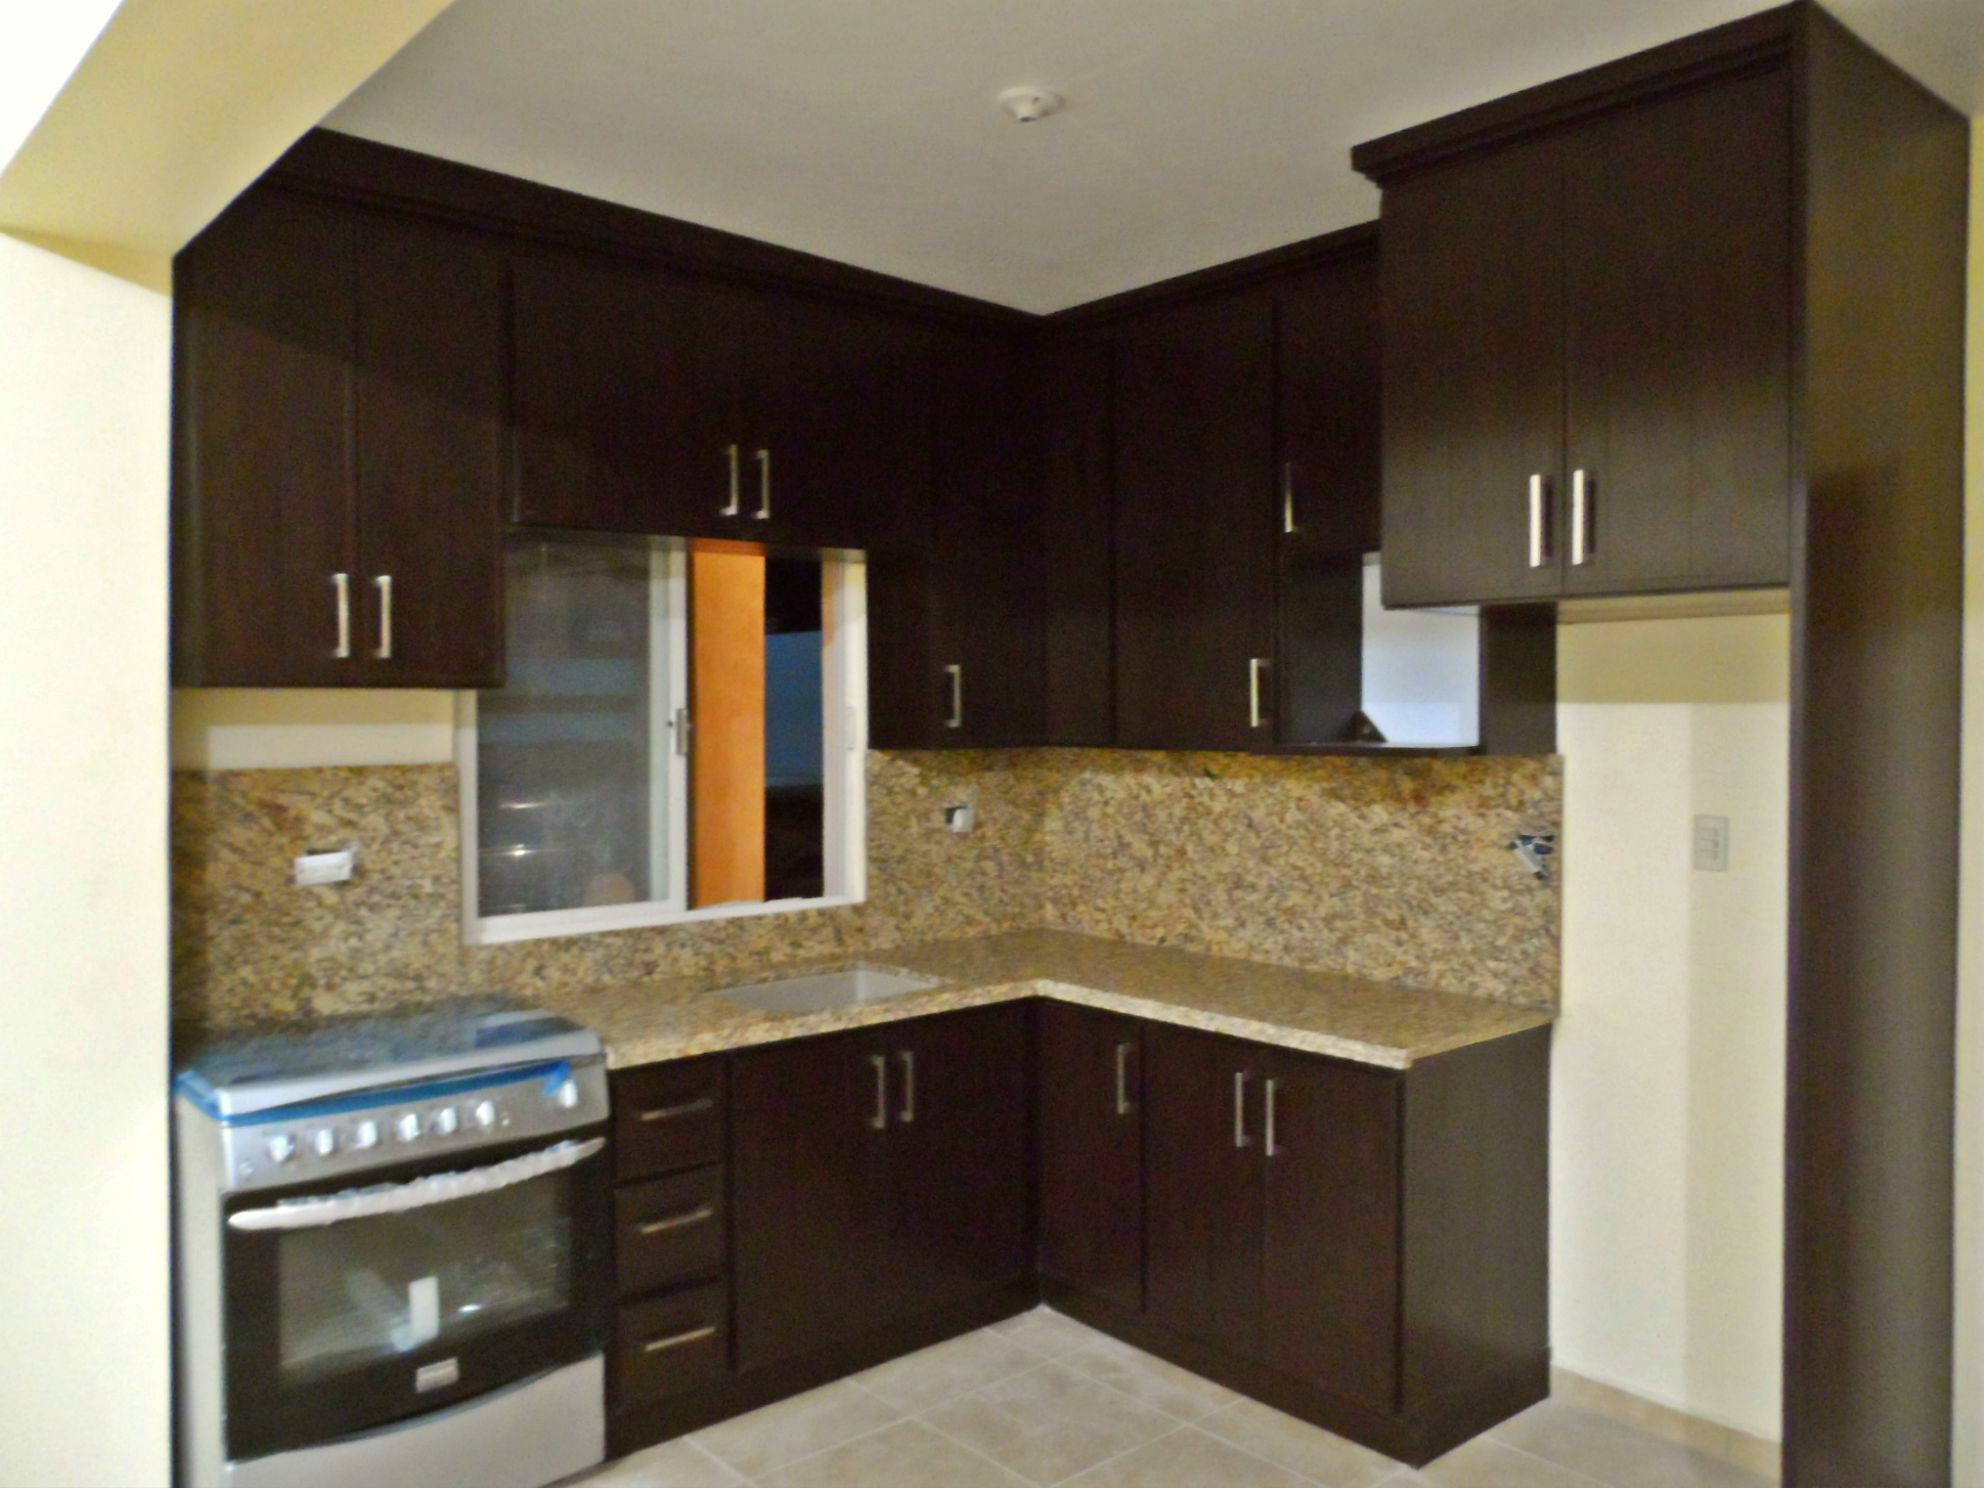 OTHER APPLICATIONS-RIGID PLASTIC KITCHEN CABINETS WITH GRANITE TOP